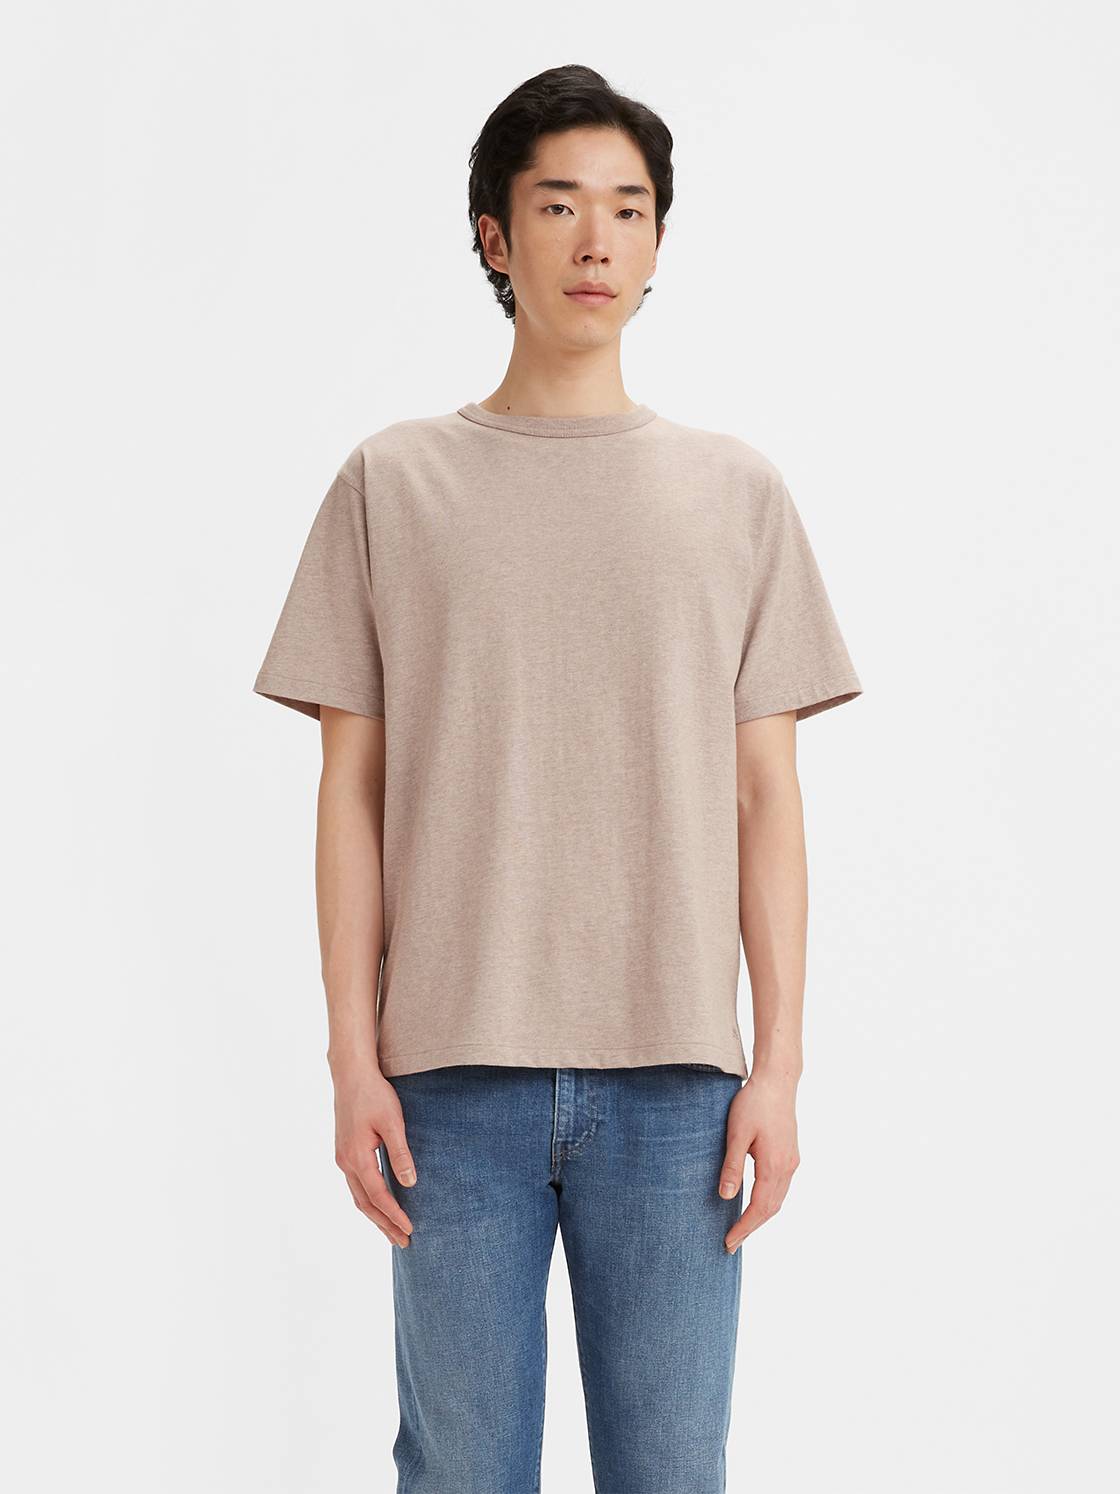 Levi's® Made & Crafted® Classic Tee 1